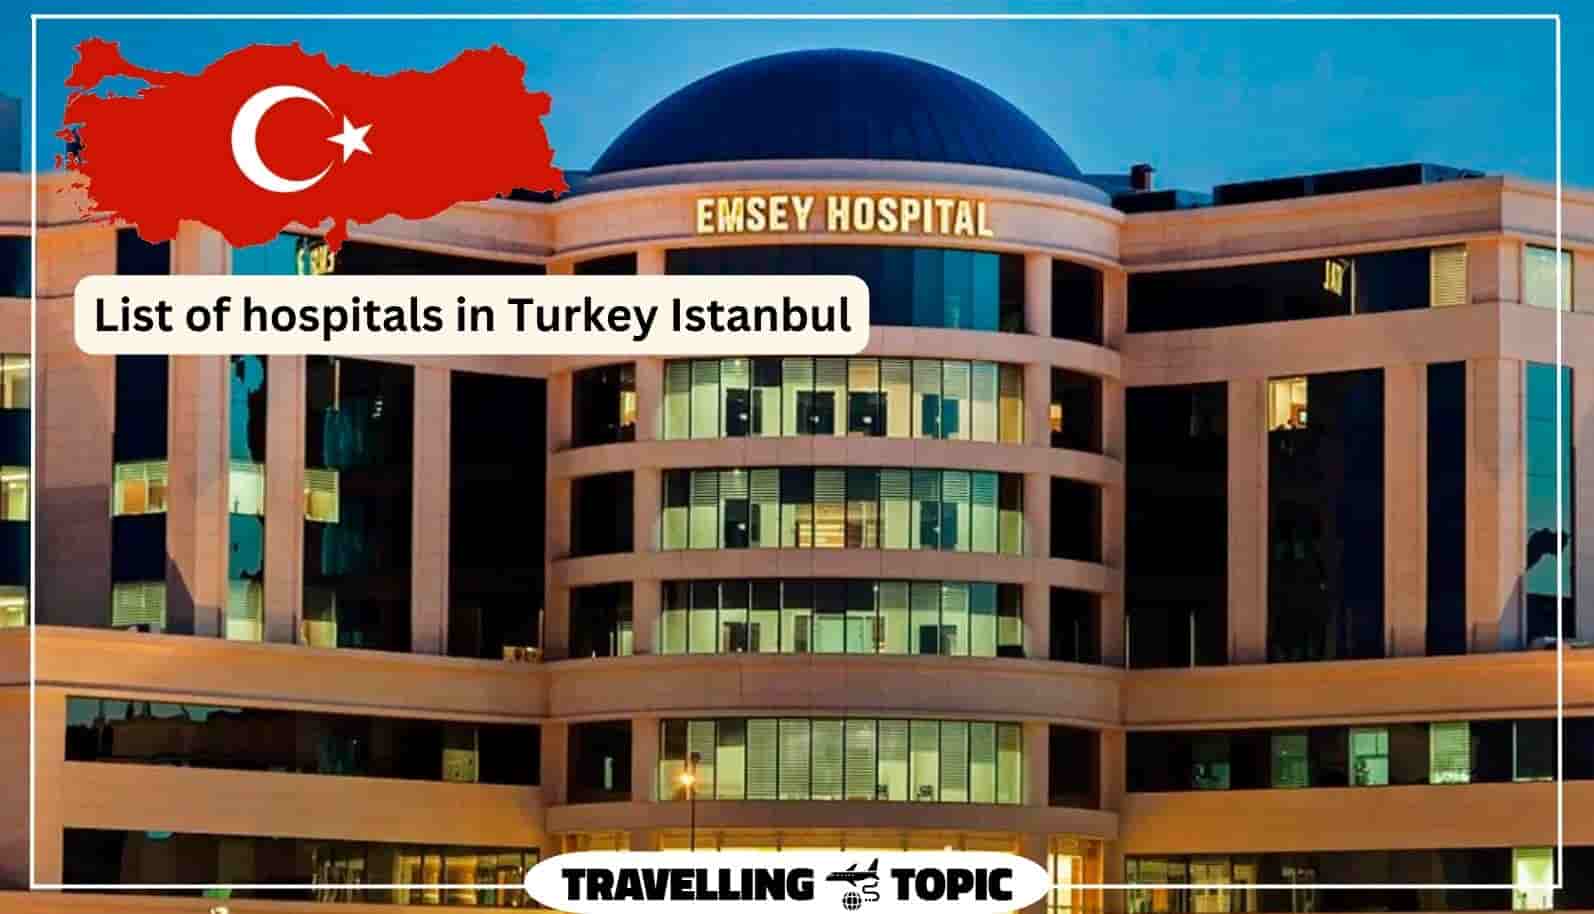 List of hospitals in Turkey Istanbul